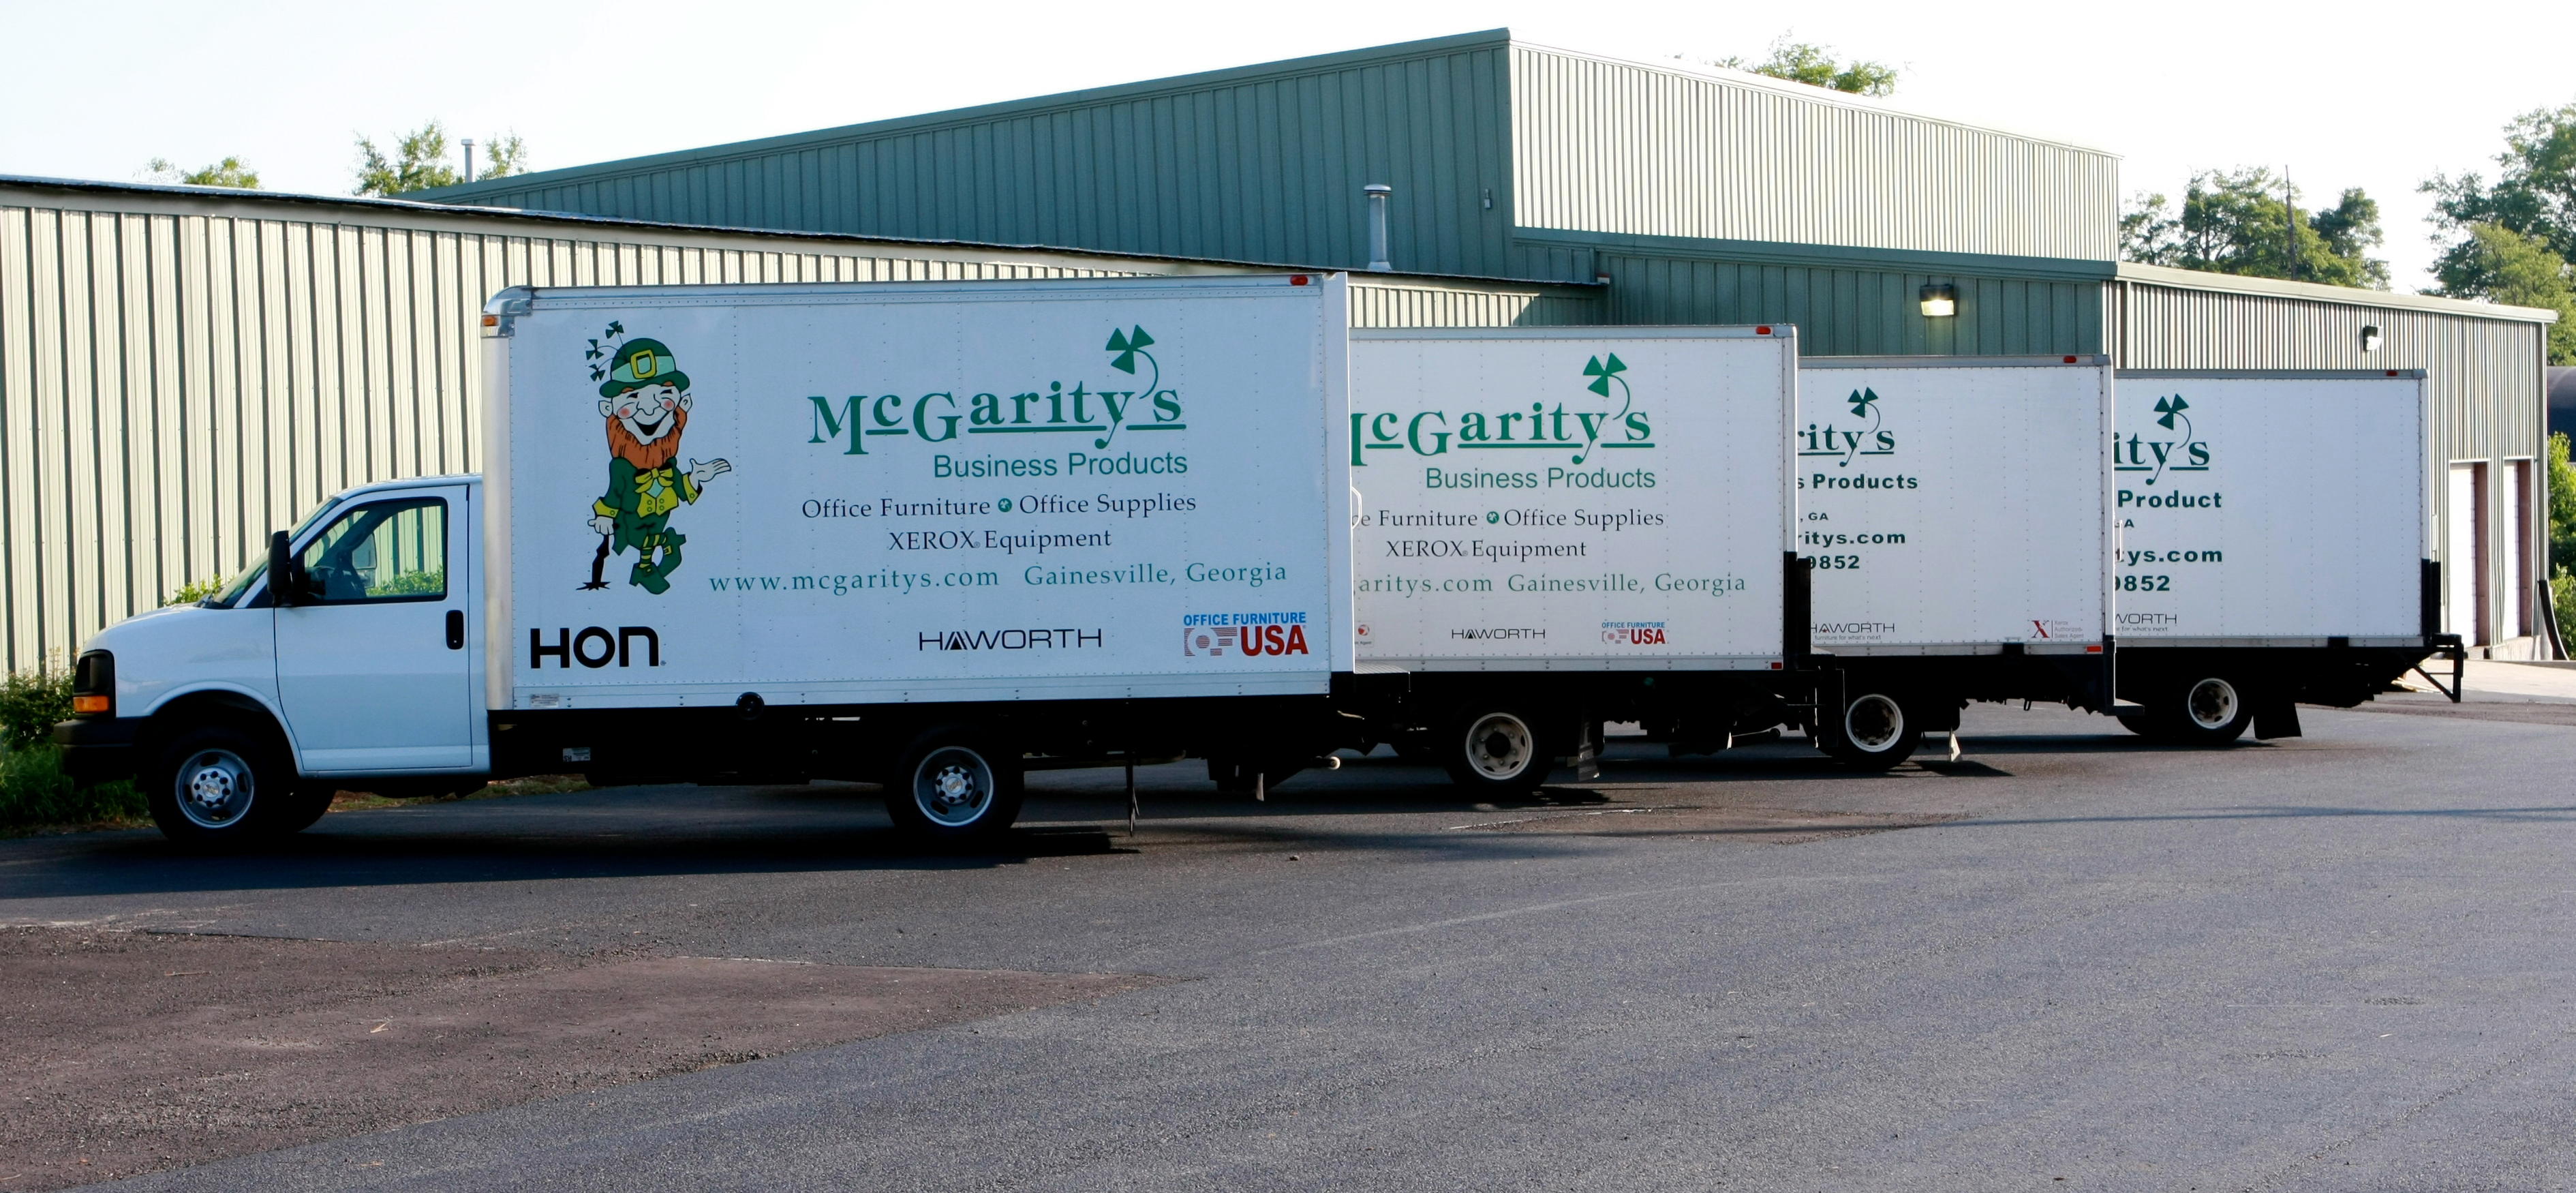 McGarity's Business Products - Gainesville, GA 30501 - (770)536-9852 | ShowMeLocal.com